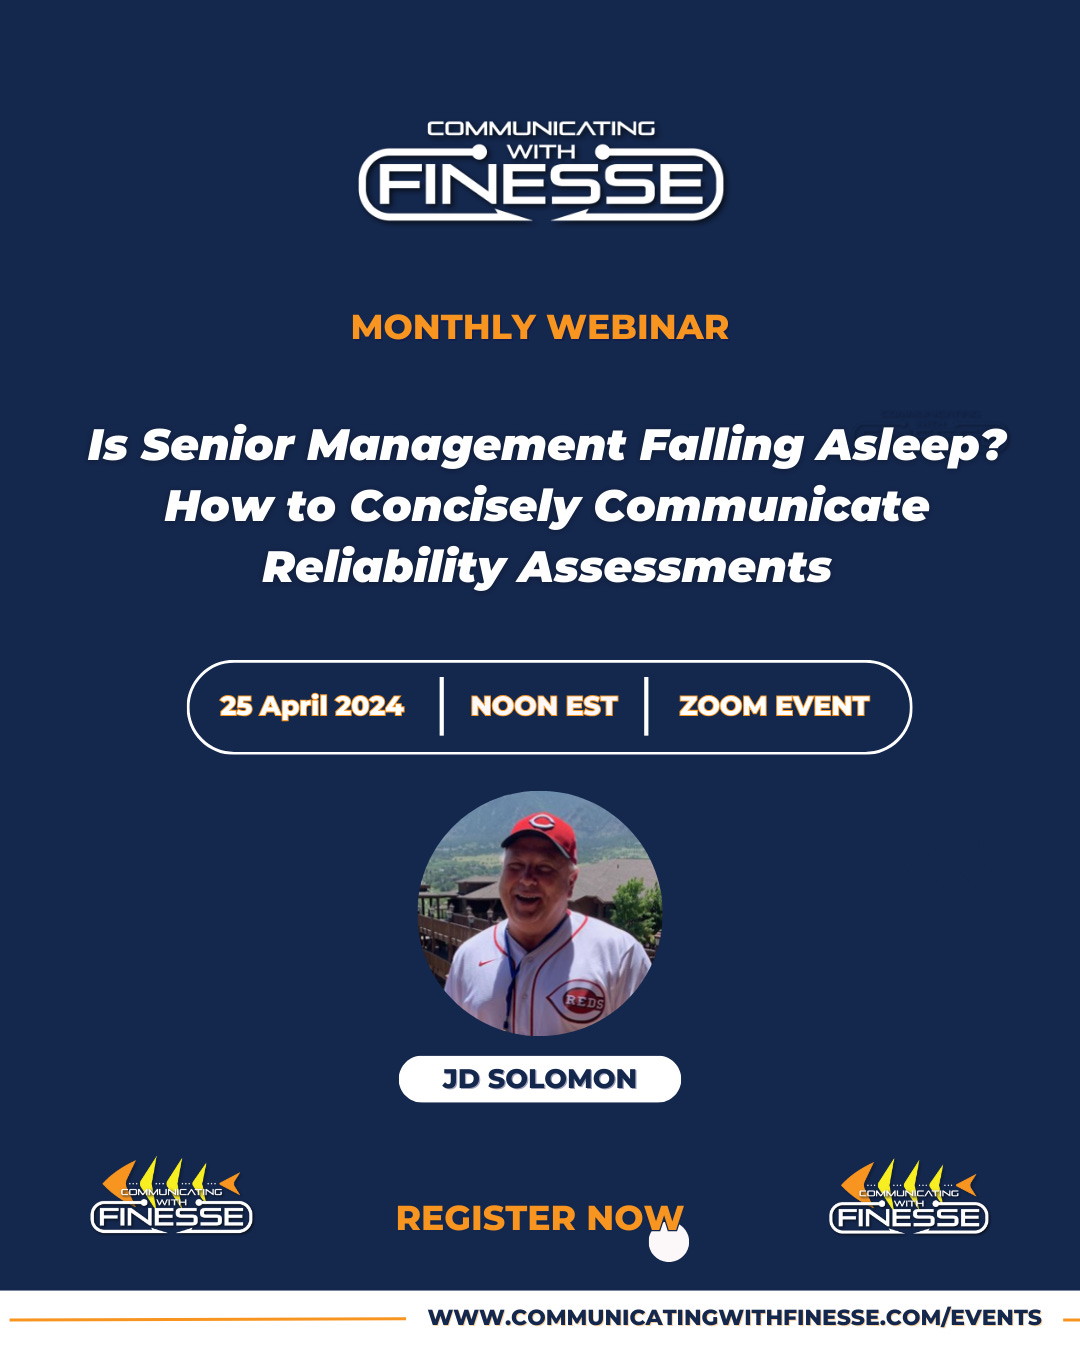 Join CWF for the free monthly webinar on April 25, 2024